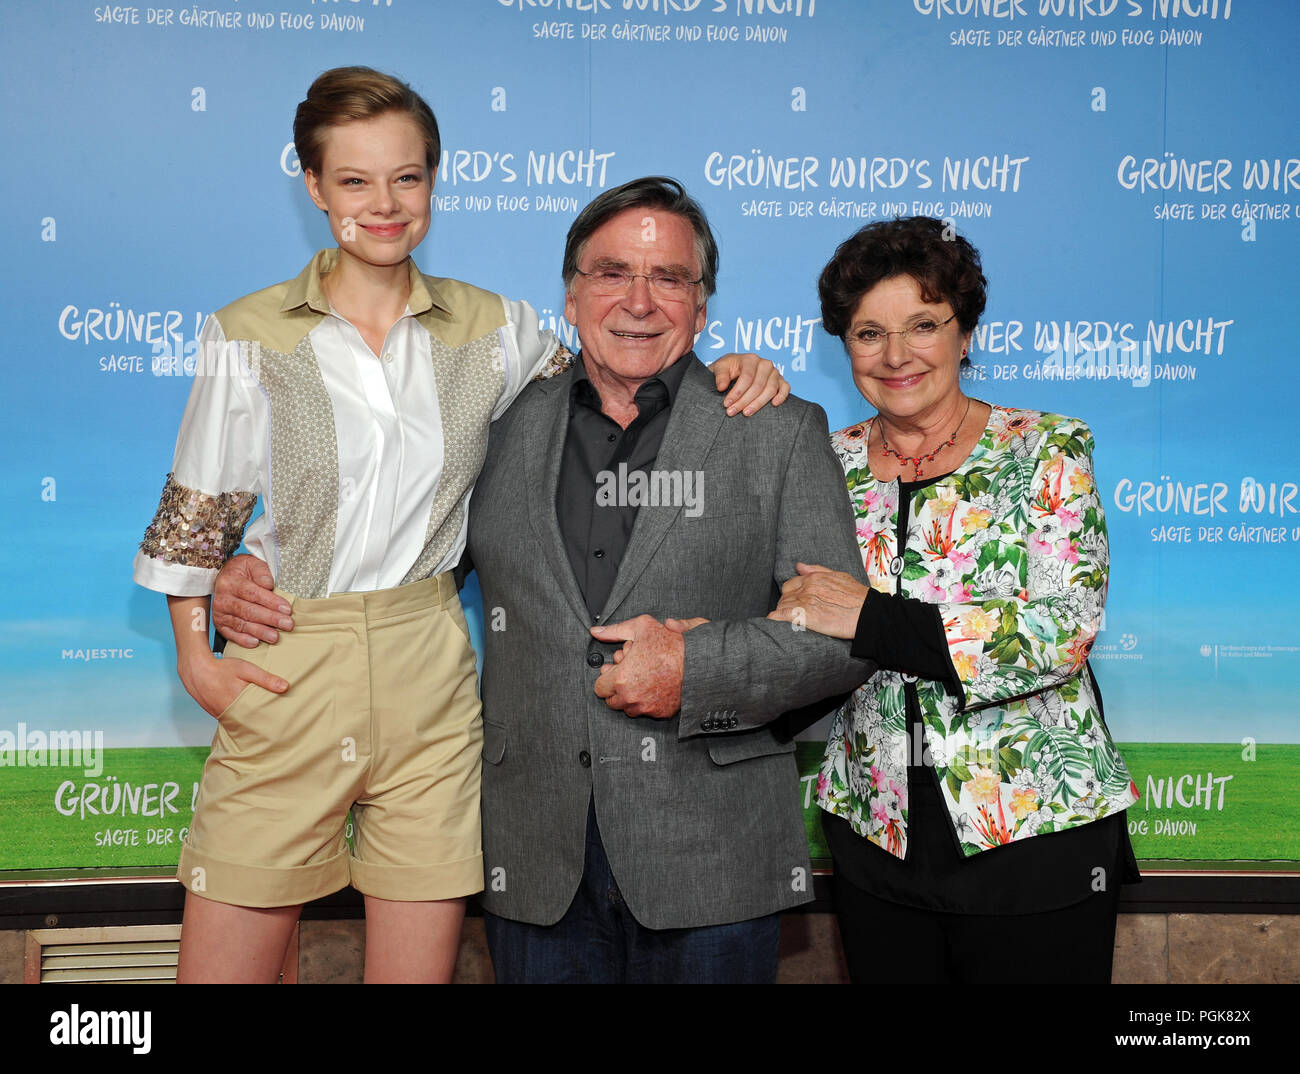 Munich, Germany. 27th Aug, 2018. The actors Emma Bading (l-r), Elmar Wepper and Monika Baumgartner come to the premiere of their film 'Grüner wird's nicht, said the gardener and flew away'. The comedy will be released on August 30, 2018. Credit: Ursula Düren/dpa/Alamy Live News Stock Photo